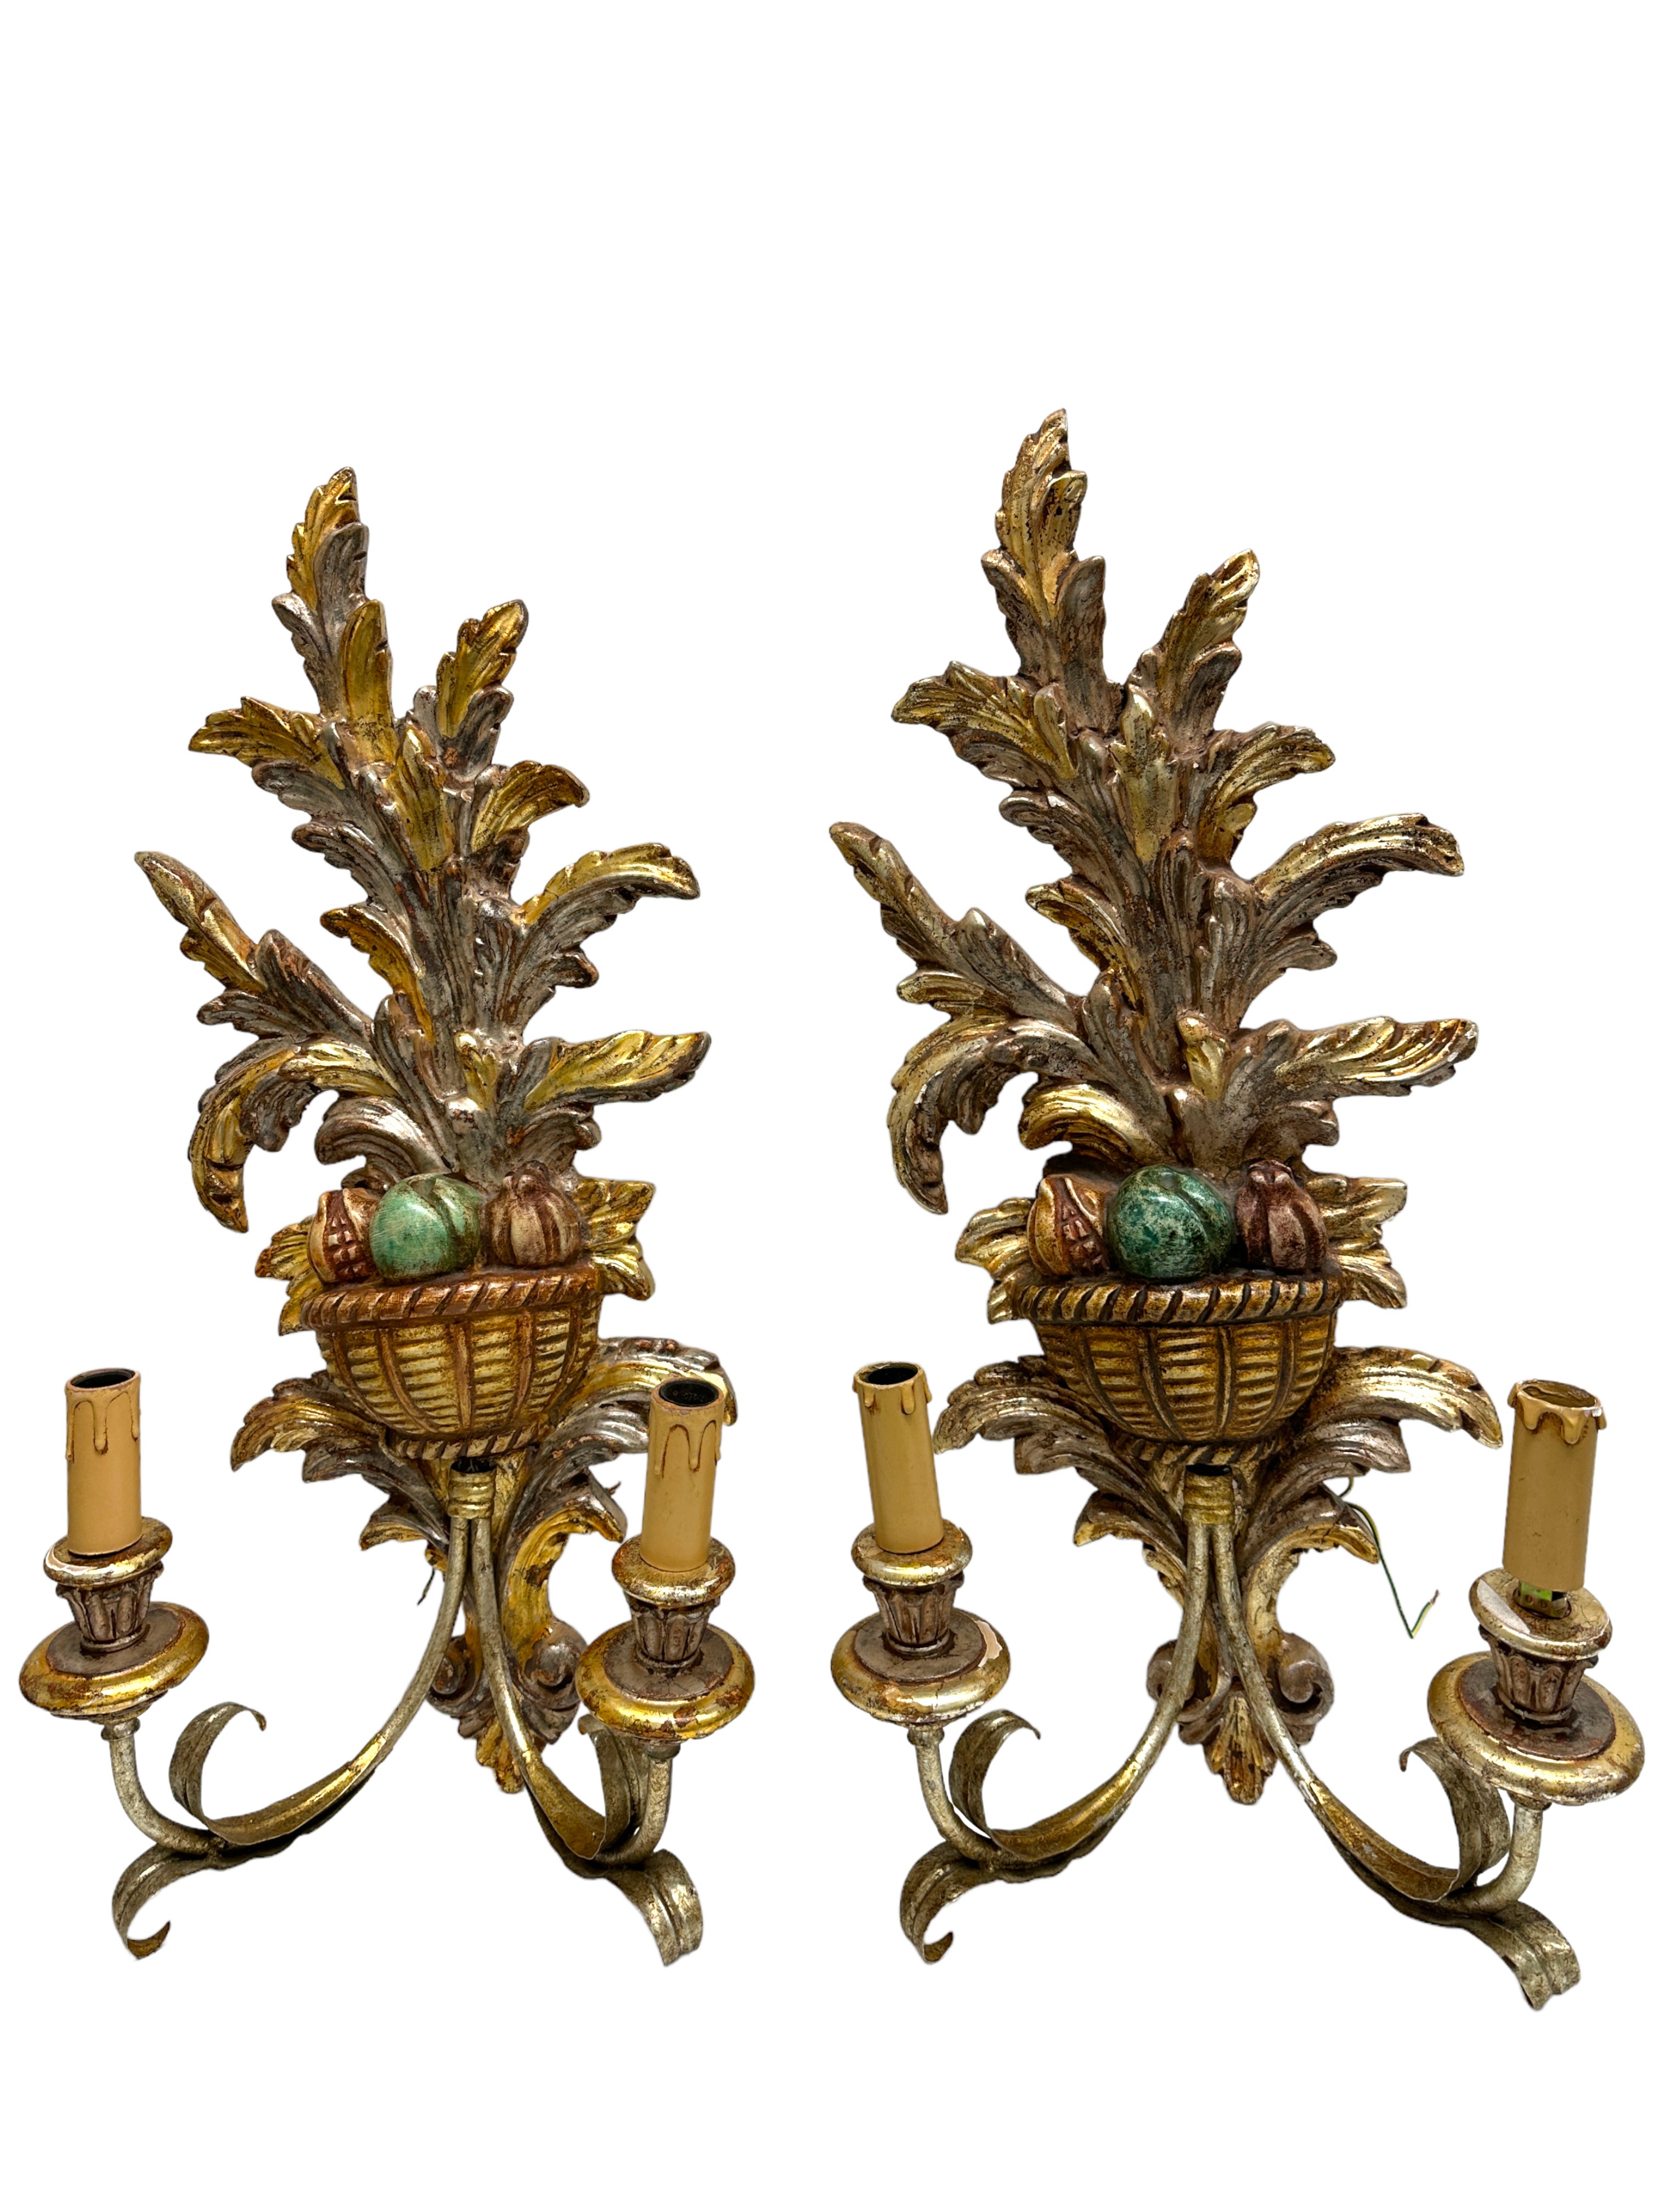 Monumental Pair of Wooden Carved Tole Toleware Sconces Silver & Gilt